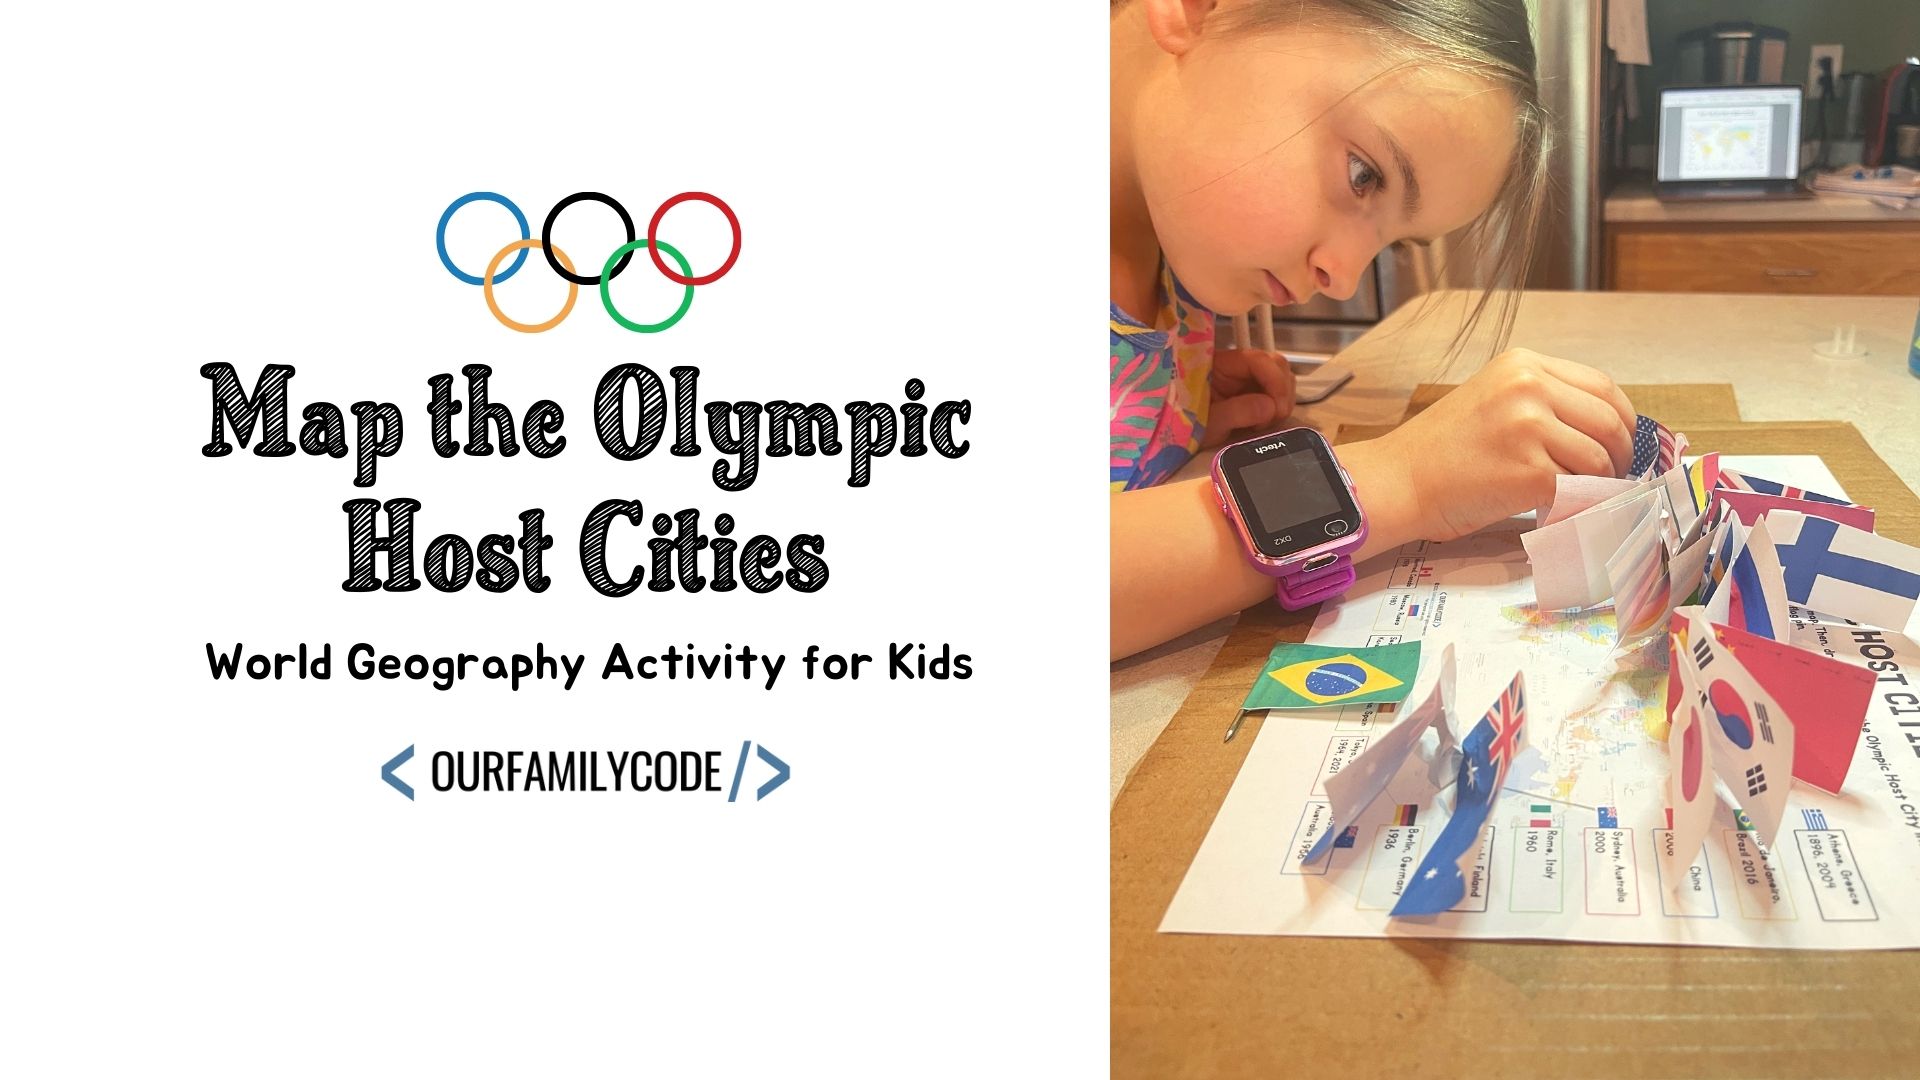 bh fb map the olympic host cities world geography activity for kids This world geography activity challenges kids to use technology to map the Olympic host cities since the Summer Olympics started in 1896.